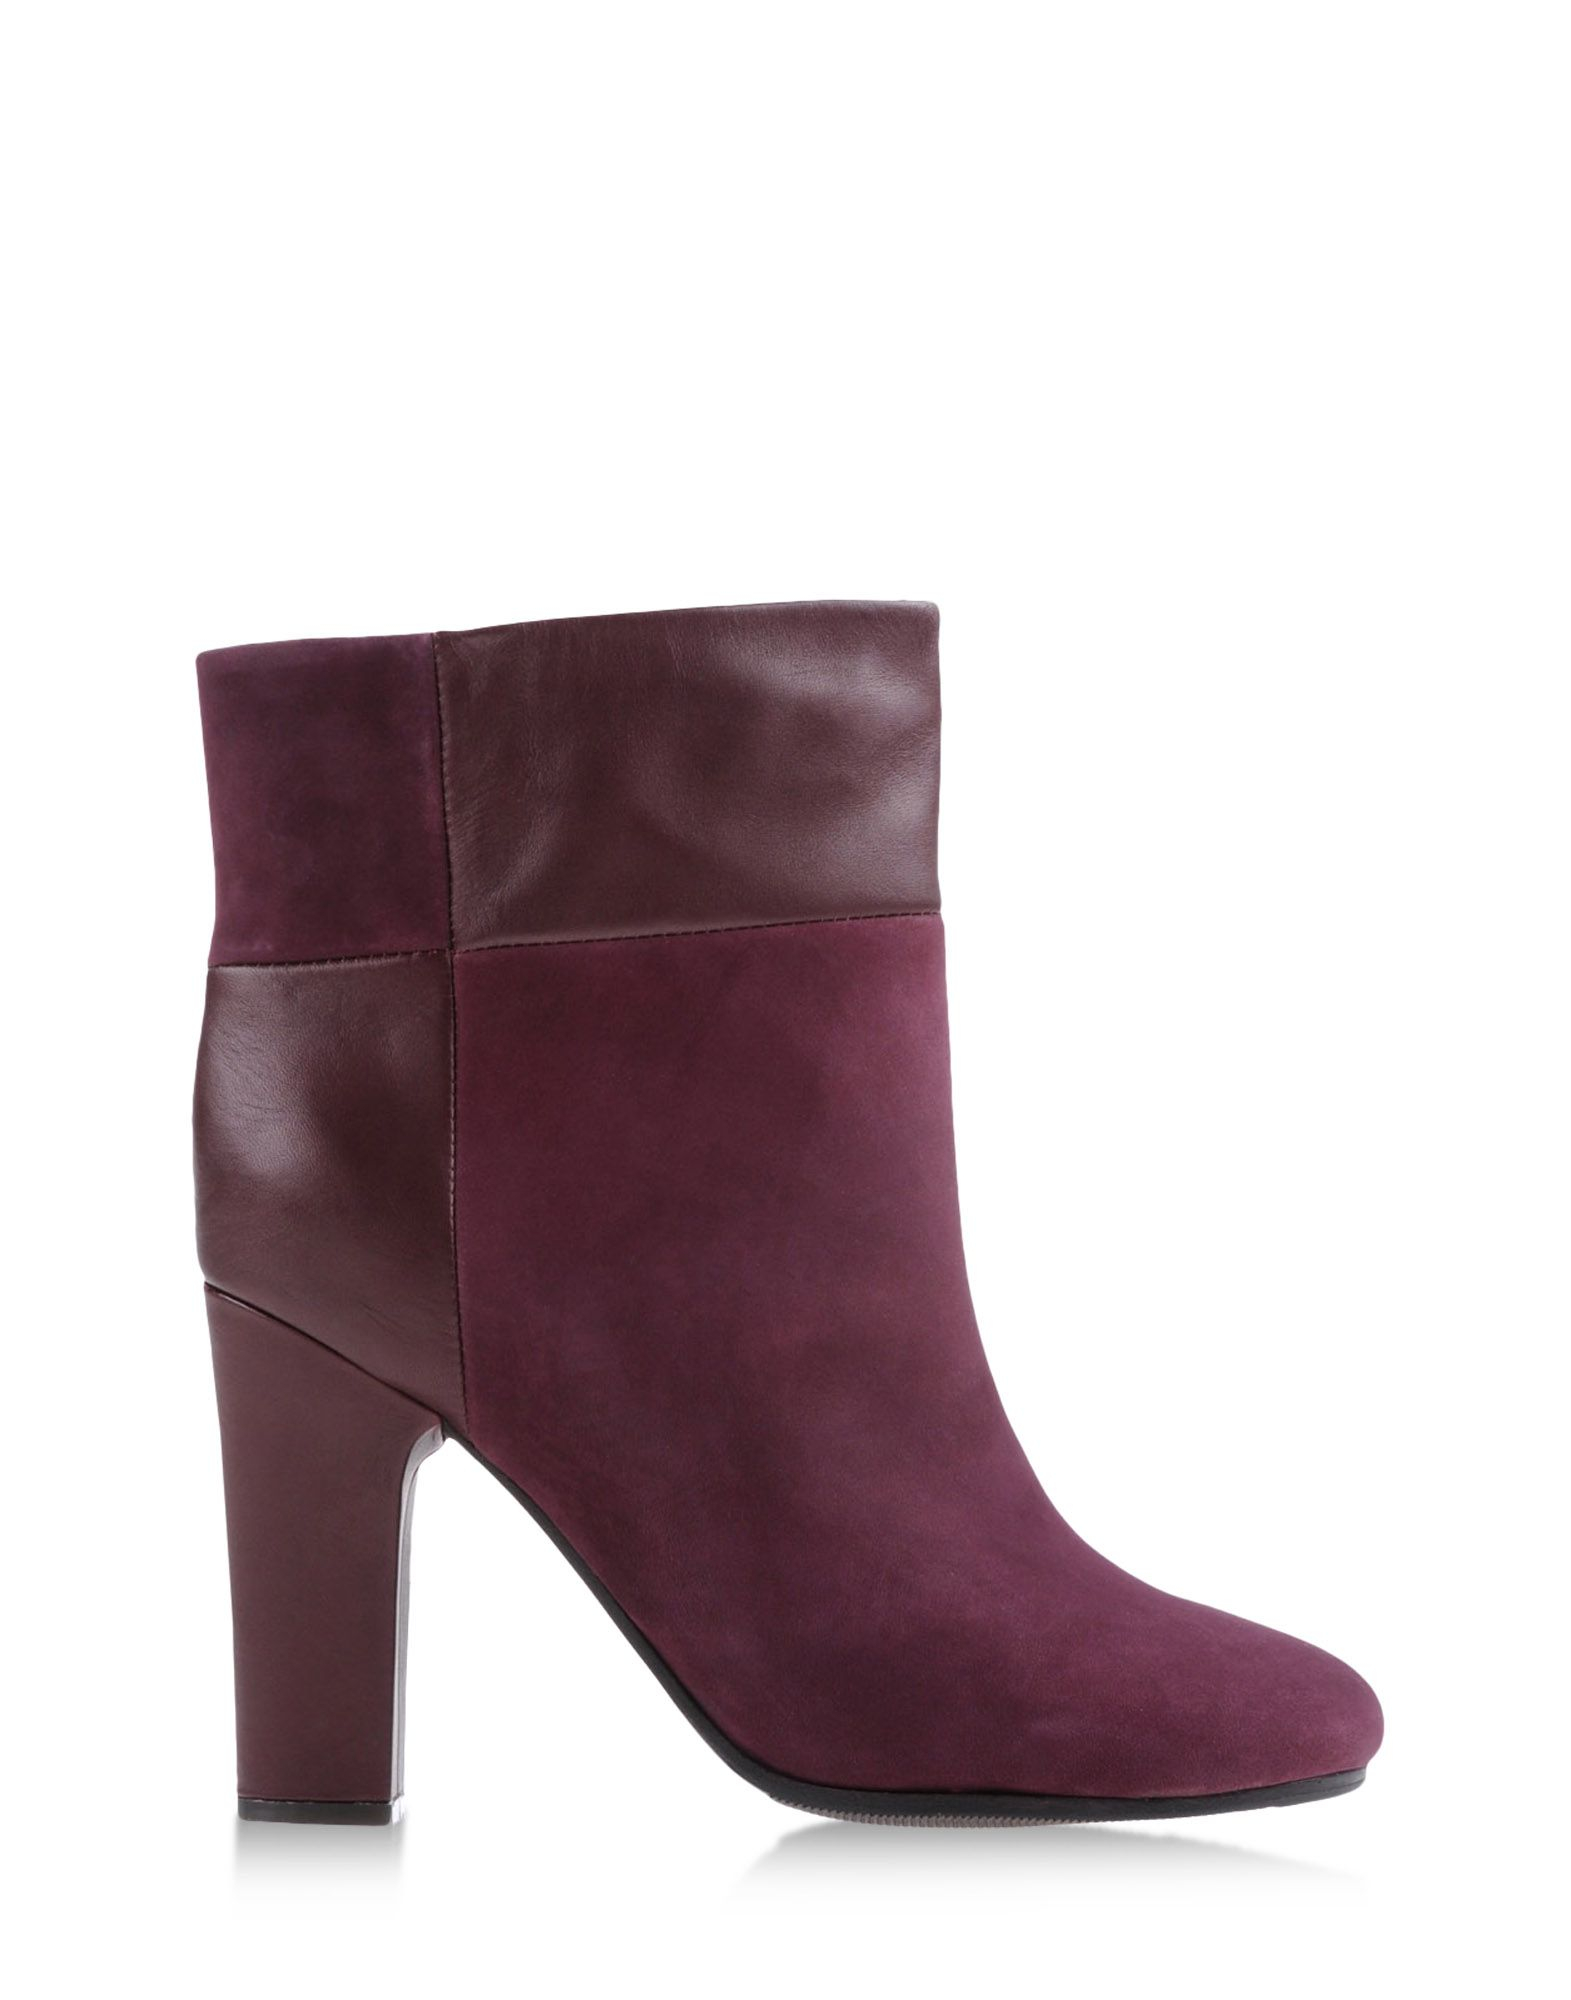 Lyst - See By Chloé Ankle Boots in Purple